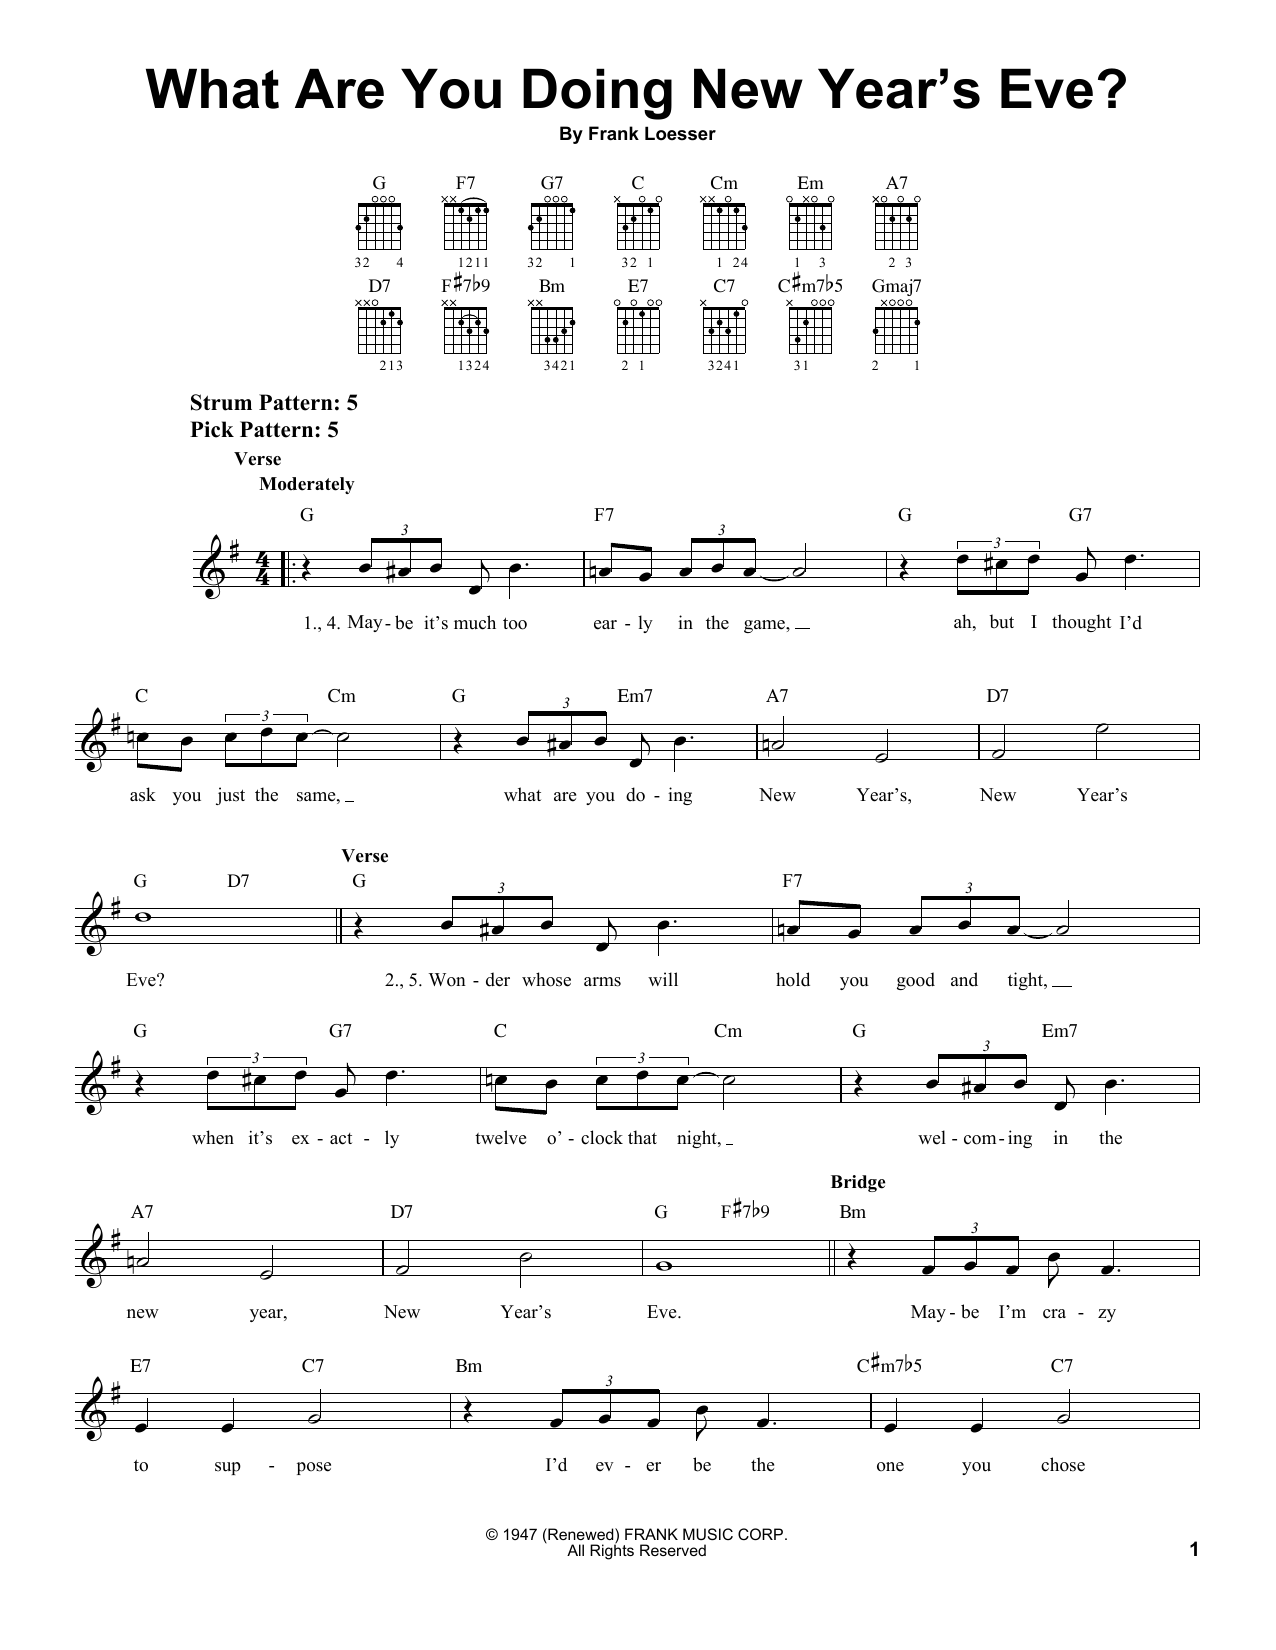 What Are You Doing New Year's Eve? sheet music